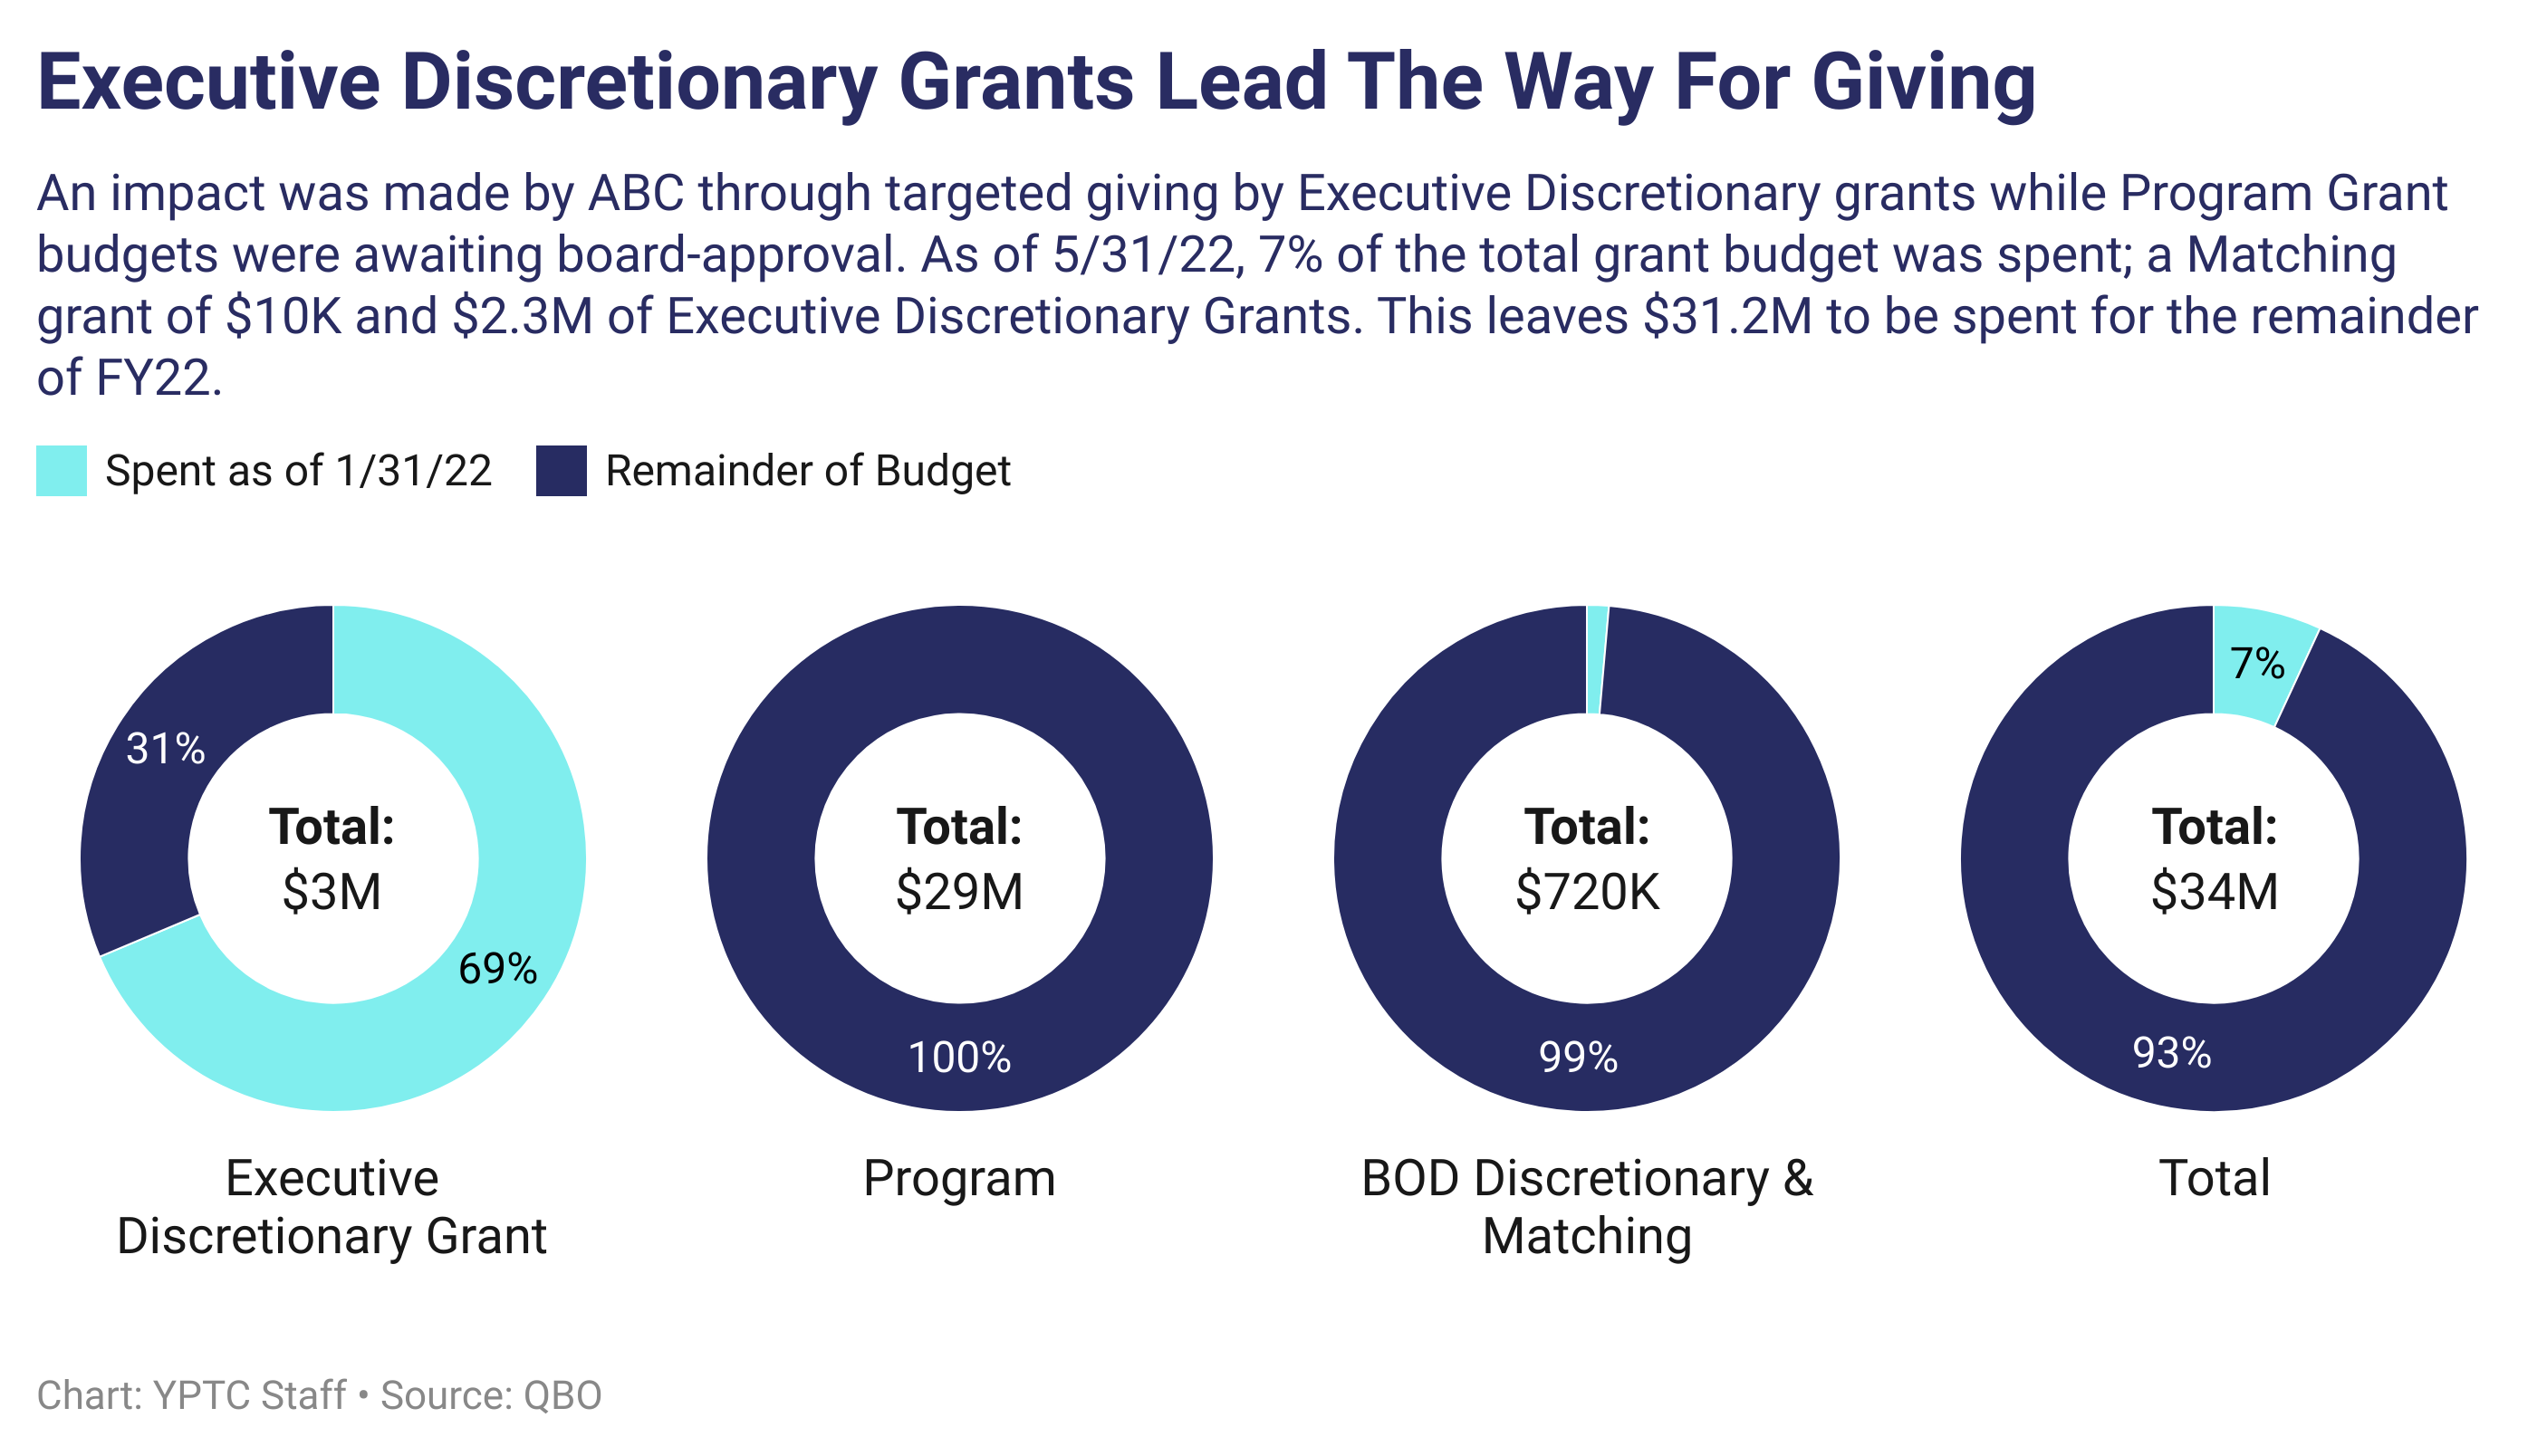 Co3b4--span-style-color-292c62-executive-discretionary-grants-lead-the-way-for-giving